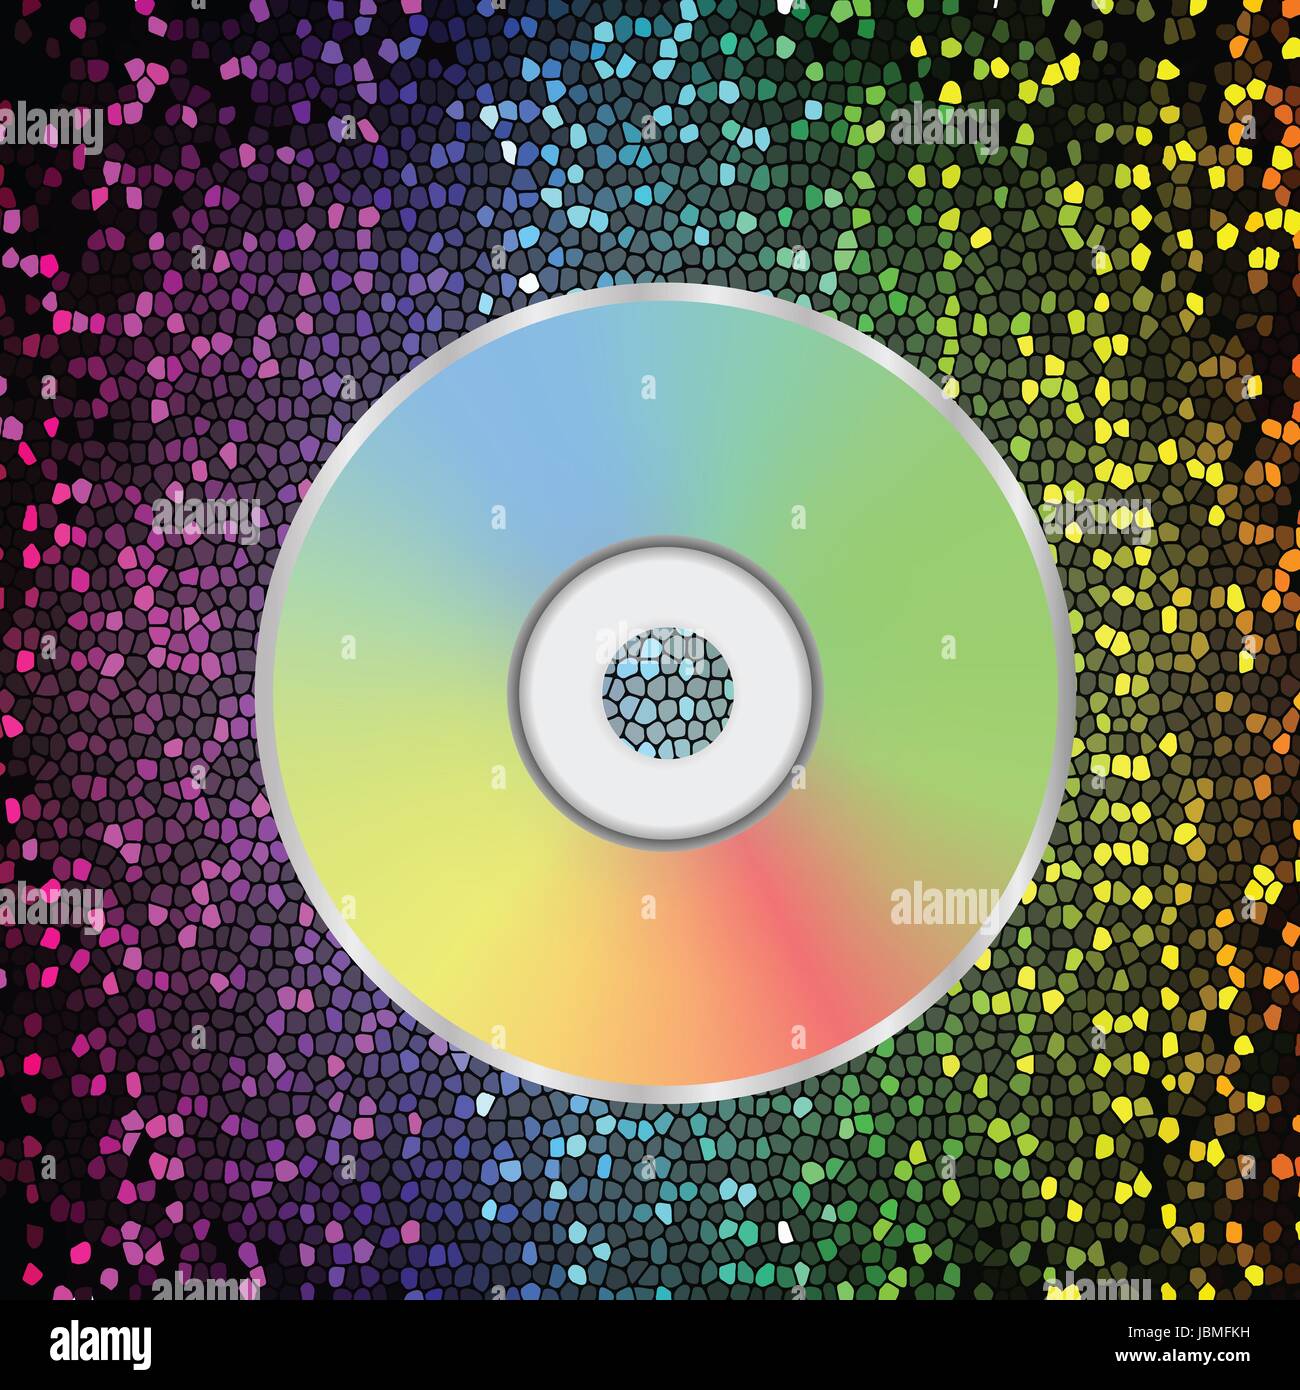 colorful illustration with compact disc icon on a varicolored background for your design Stock Photo